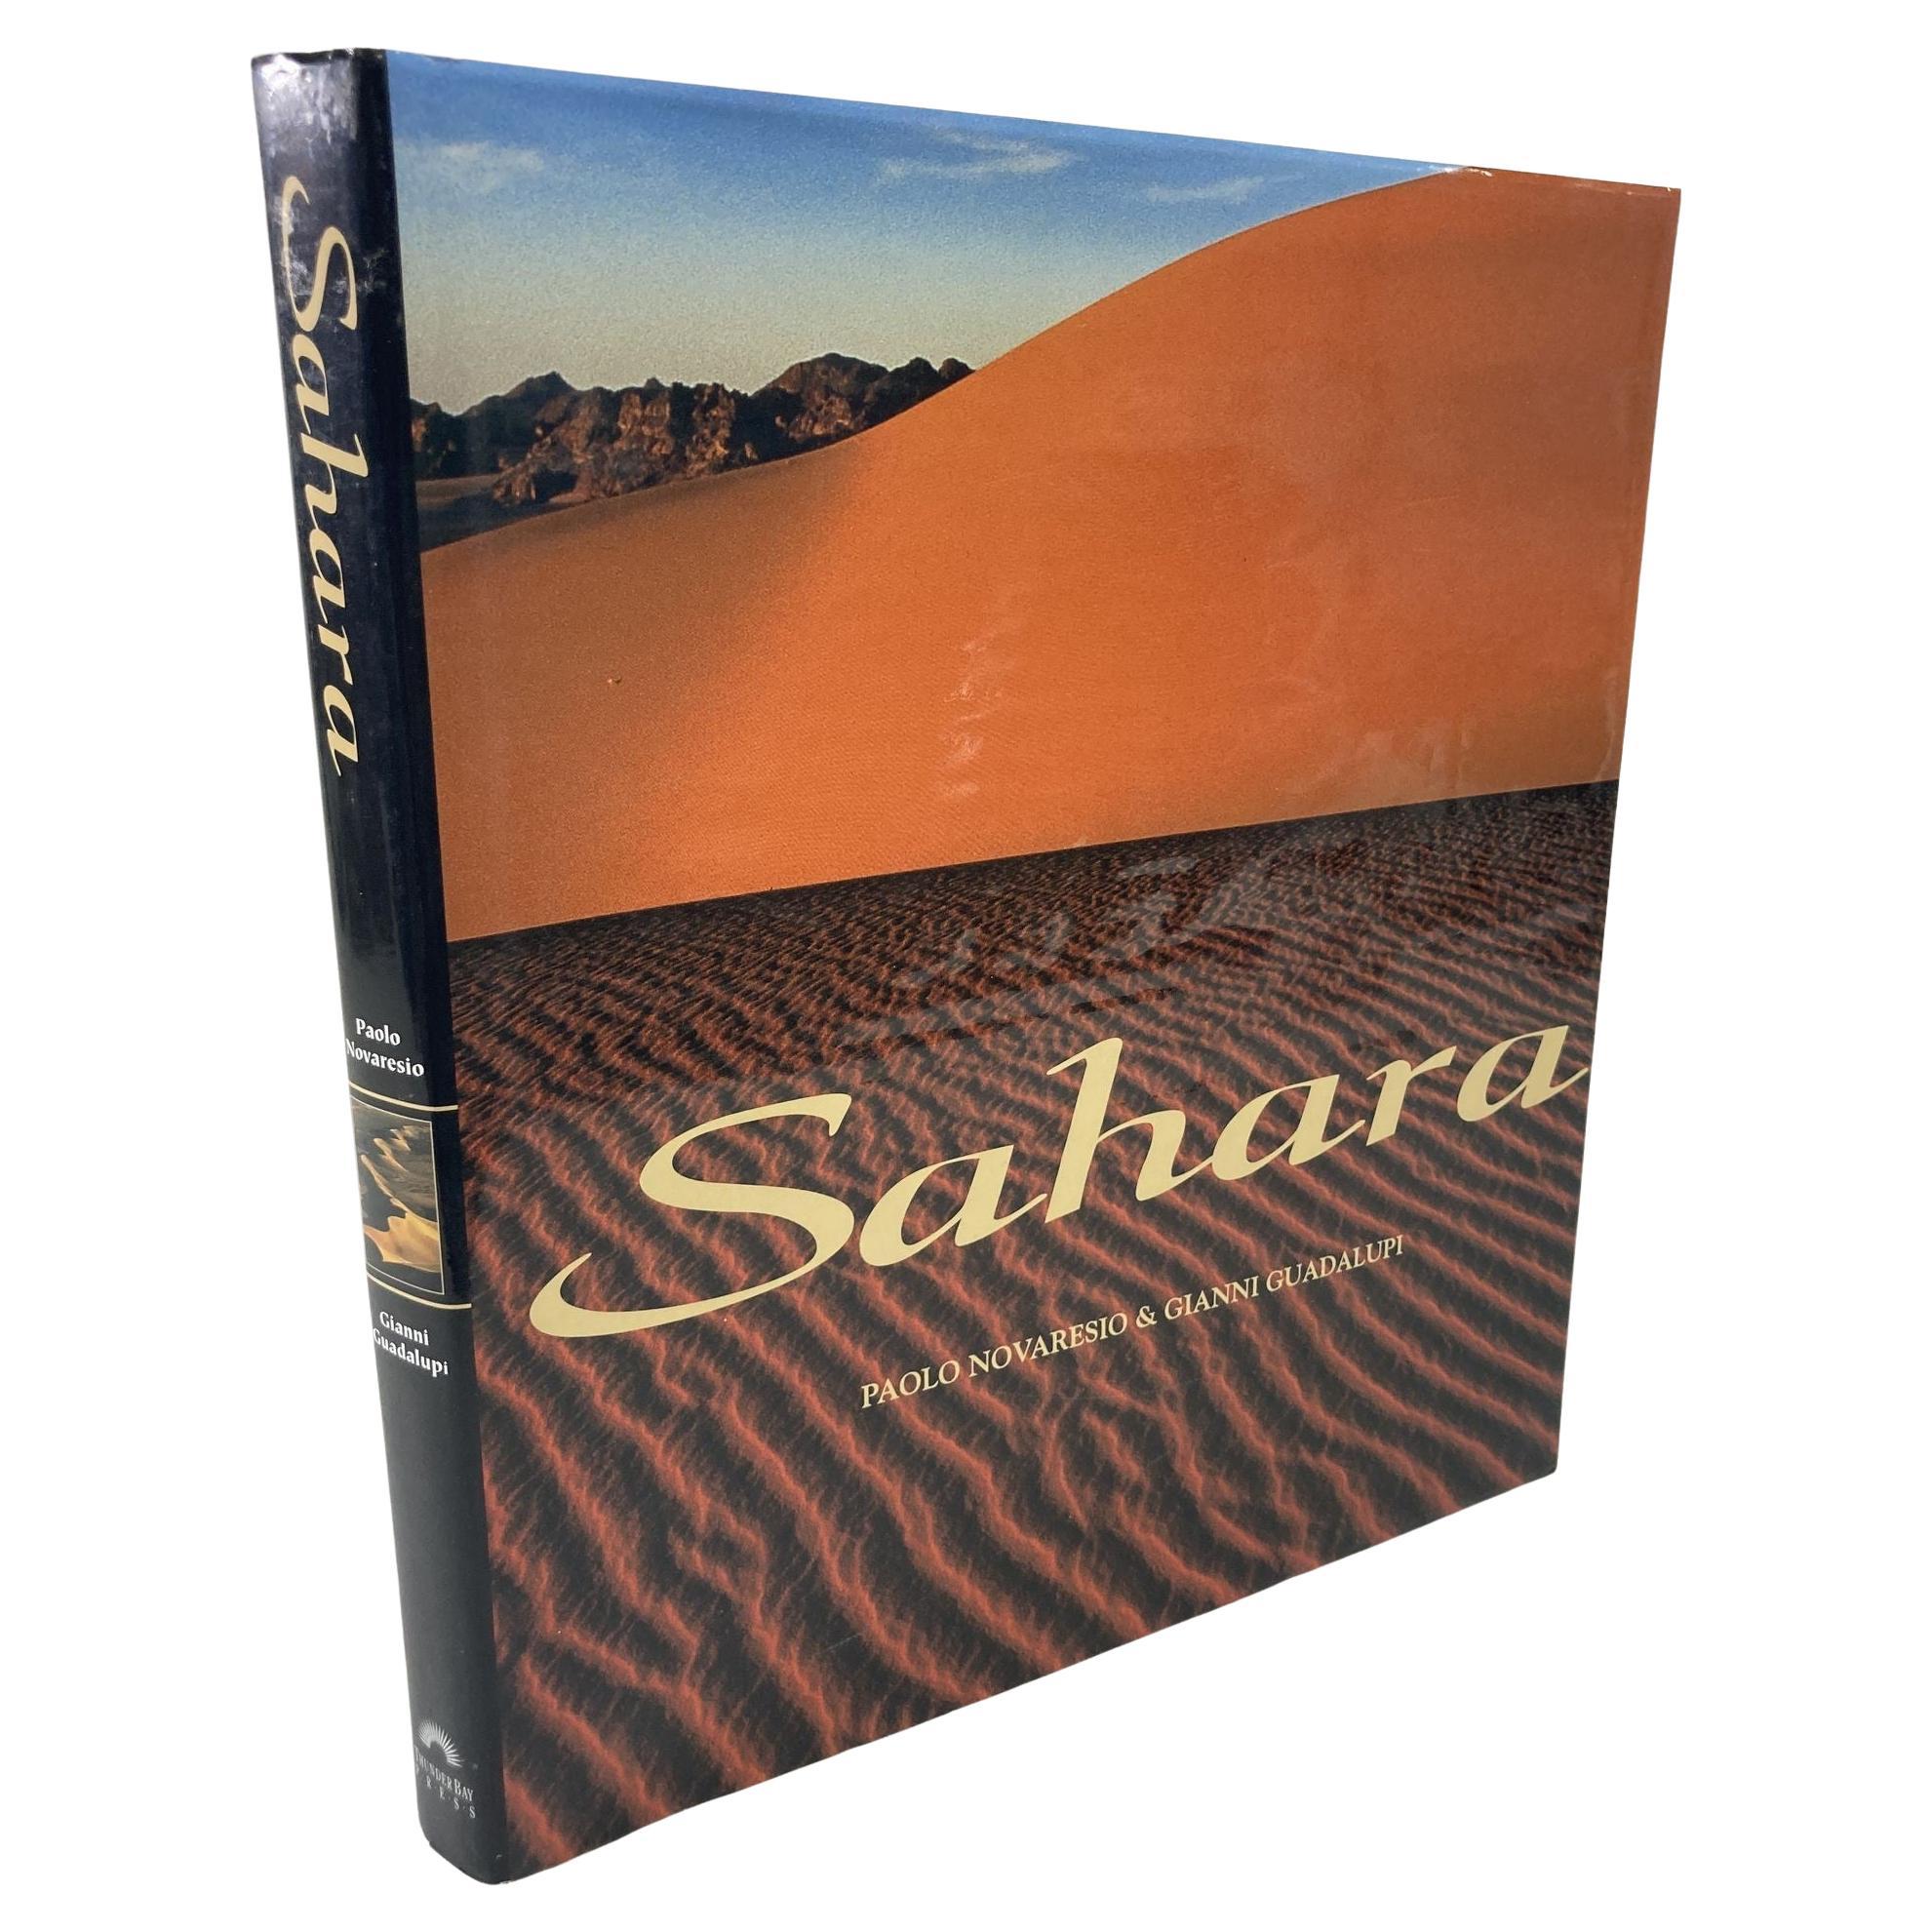 Sahara, an Immense Ocean of Sand by Paolo Novaresio, Gianni Guadalupi Hardcover For Sale